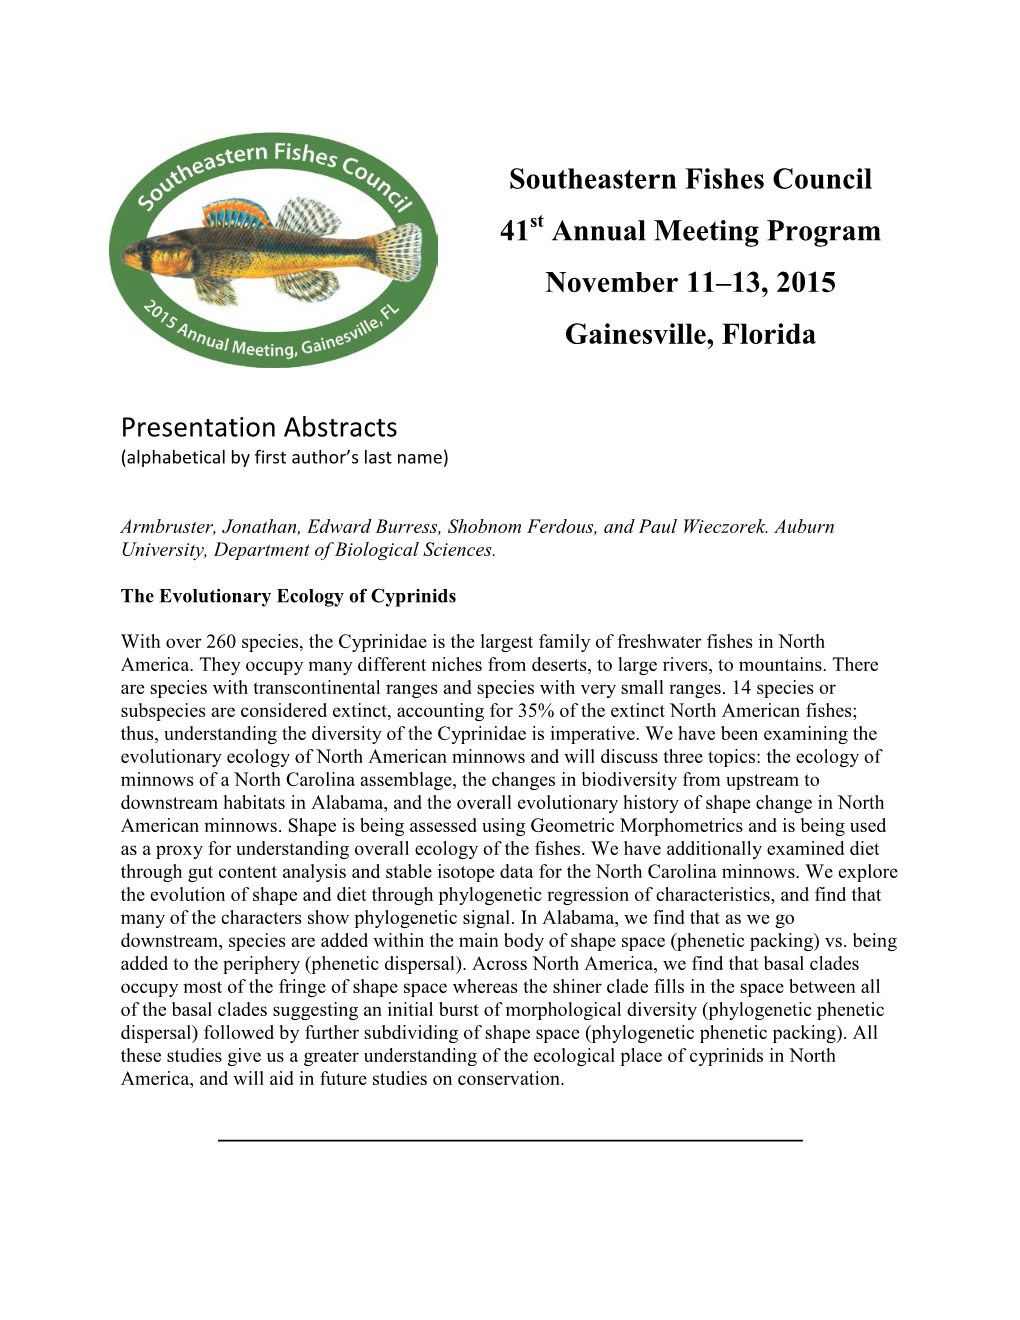 Southeastern Fishes Council 41 Annual Meeting Program